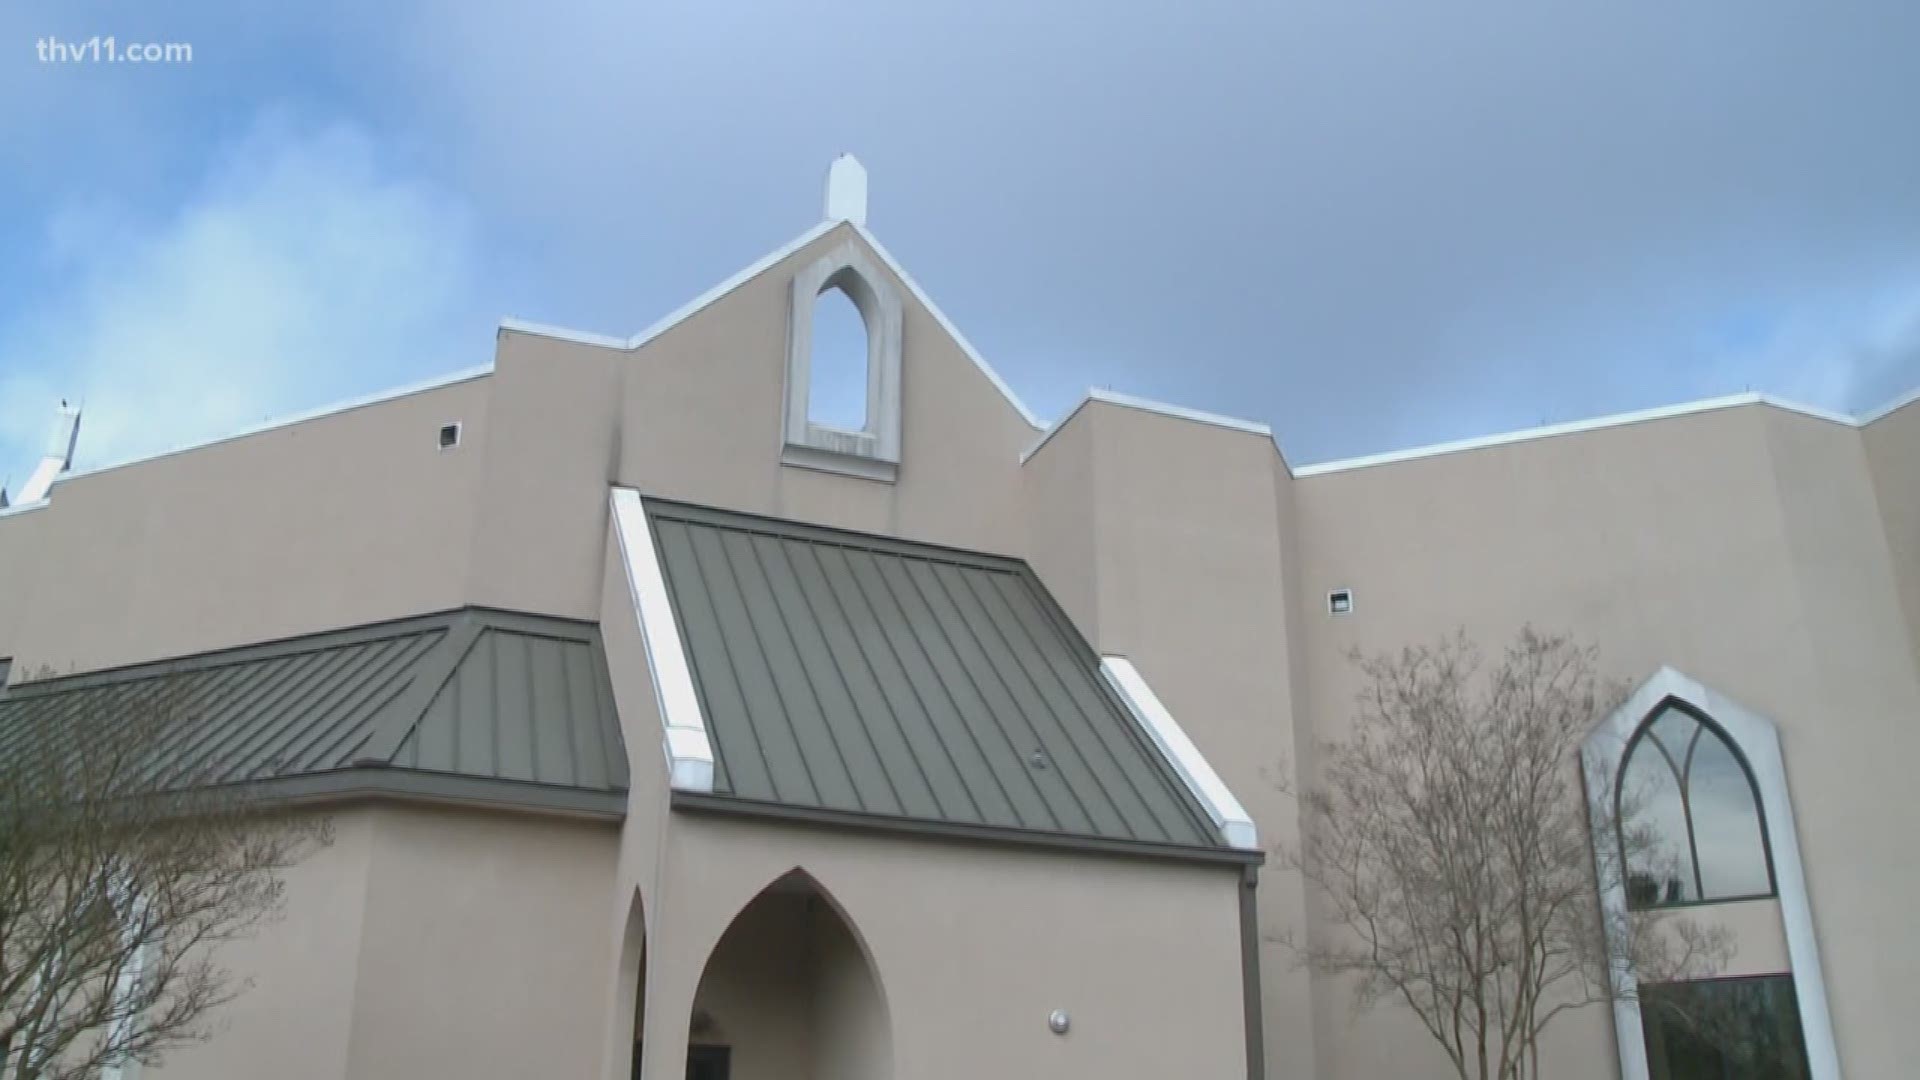 As the government shutdown continues to take its toll on Americans, one church here in central Arkansas aims to ease the pain.